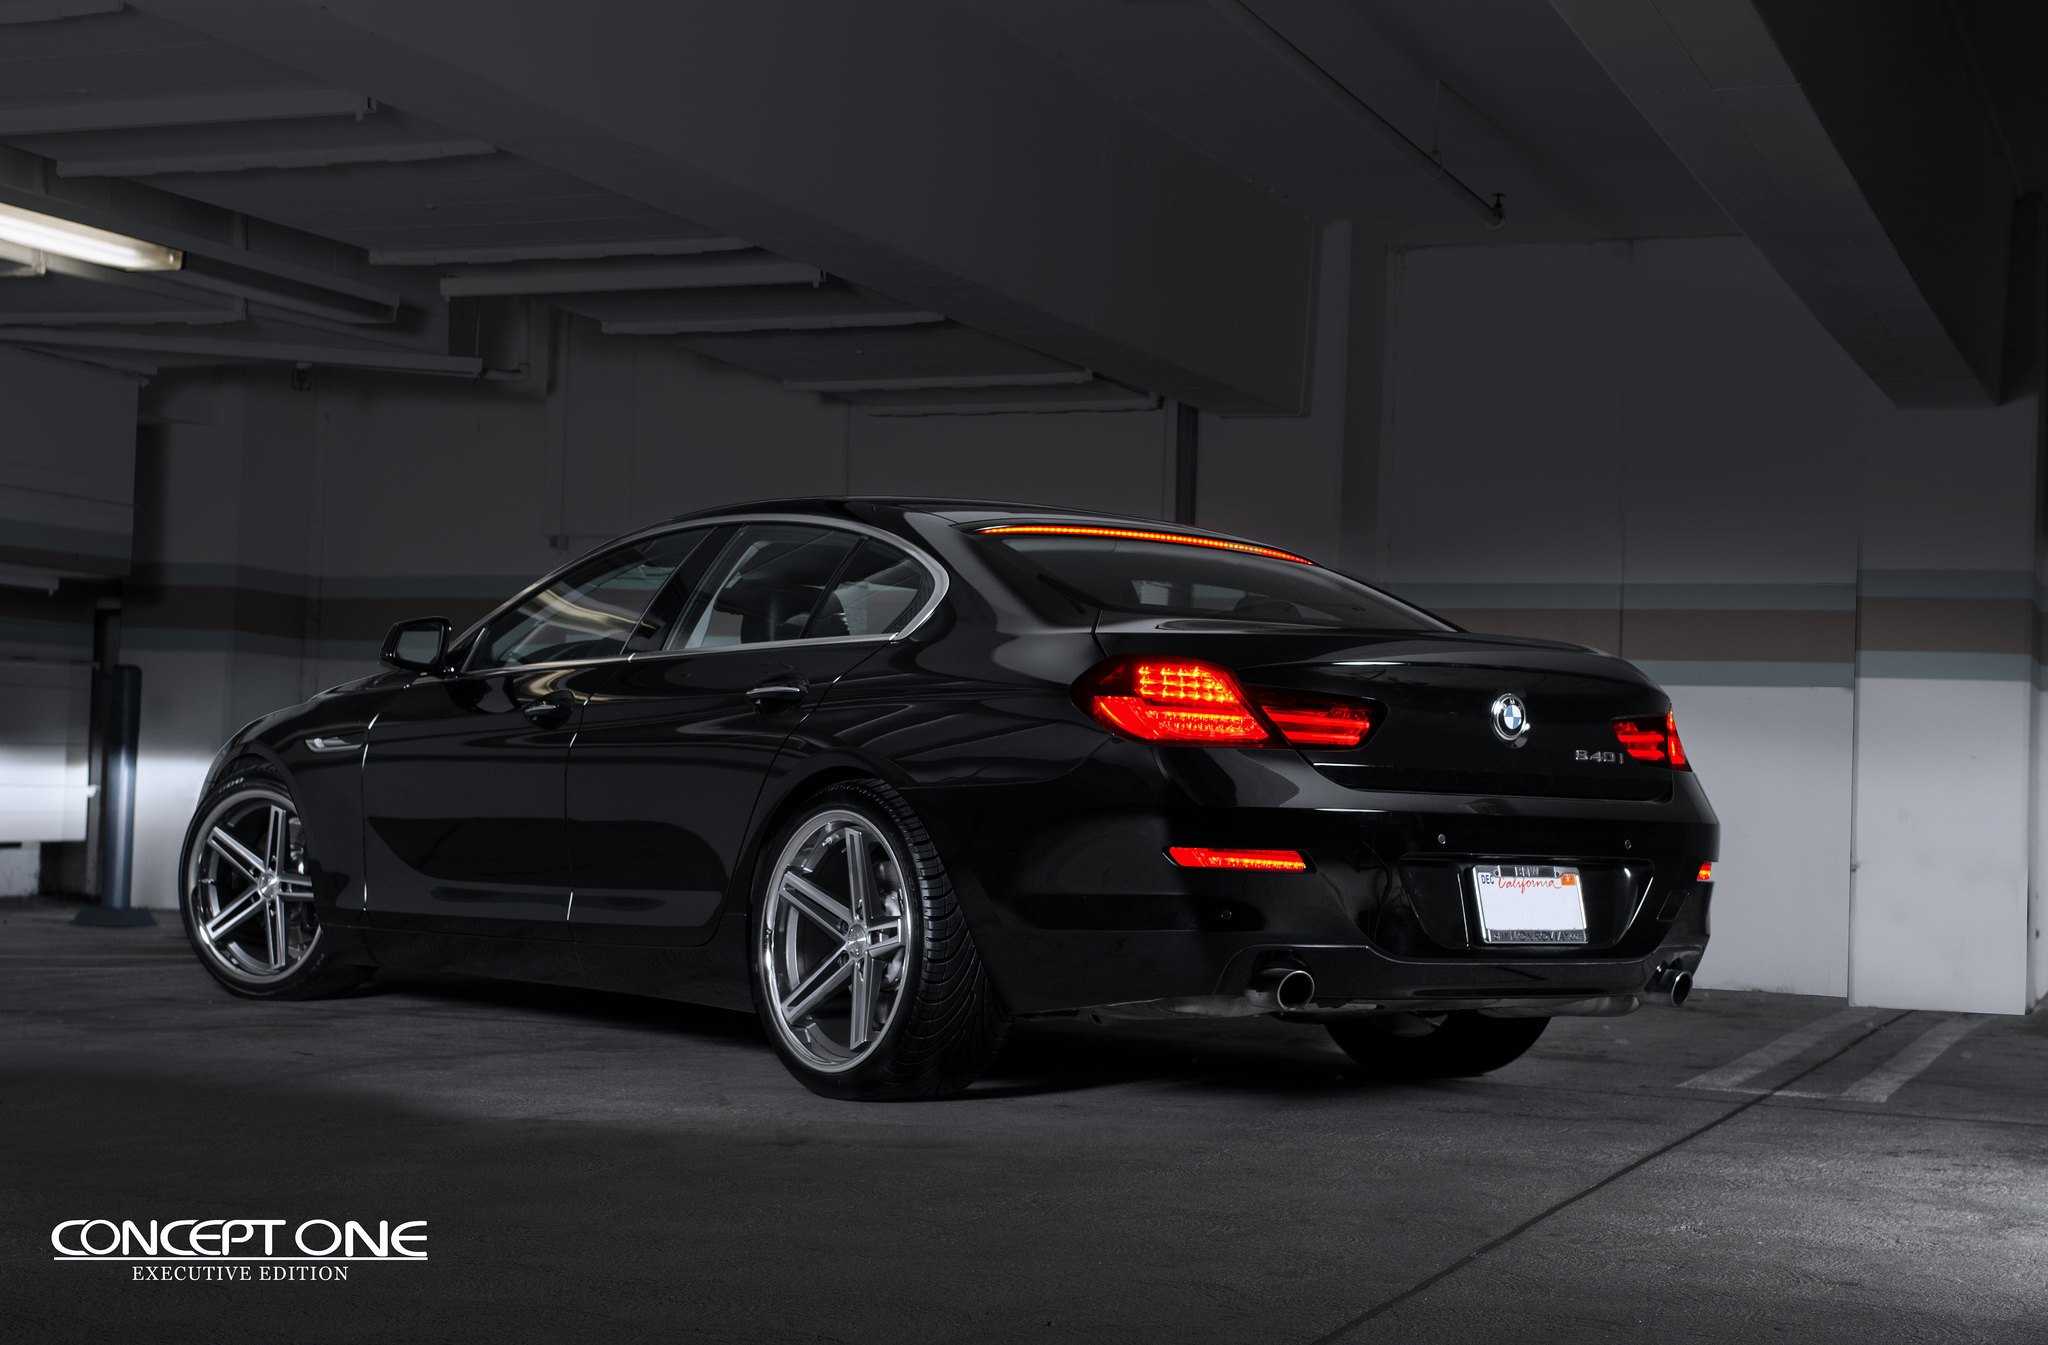 Red LED Taillights on Black BMW 6-Series - Photo by Concept One